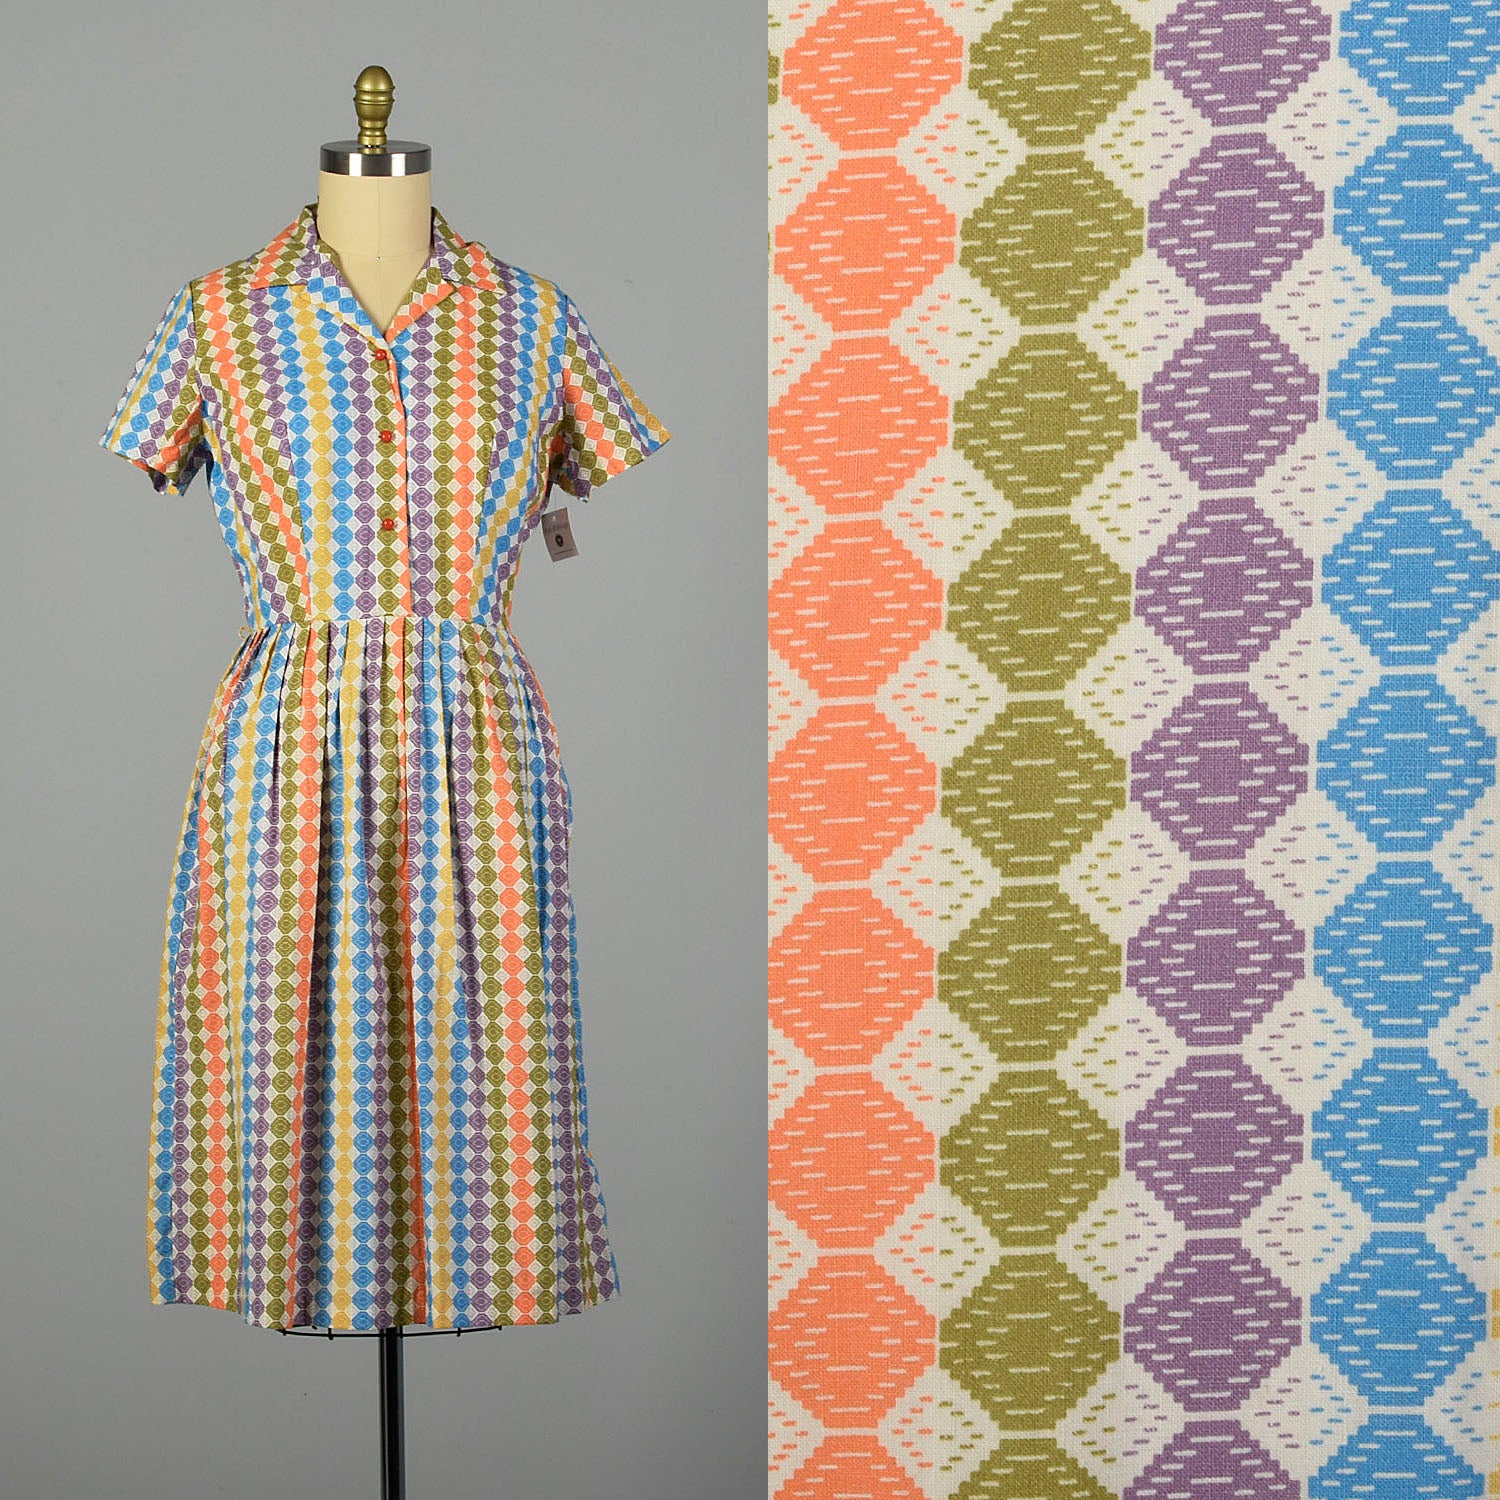 Large 1950s Cotton Day Dress with Colorful Print Shirtwaist